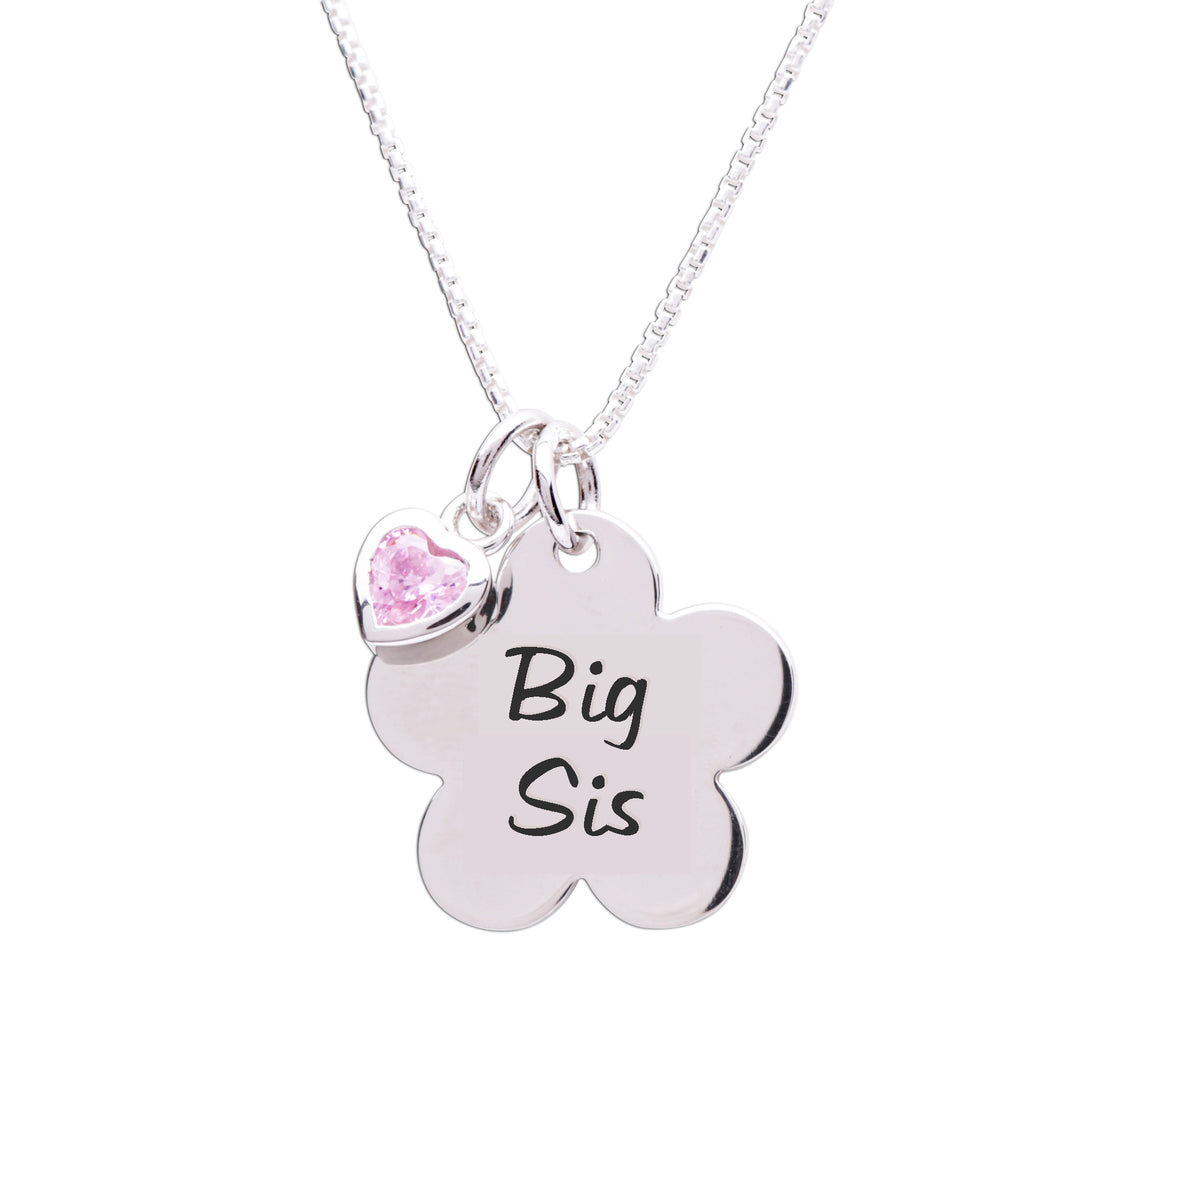 Big Sister Necklace  Small Girls Jewelry, Gift for Big Sister, Silver Girl  Necklace, Sterling Silver Big Sister Necklace, Birthstone Charm - aka  originals